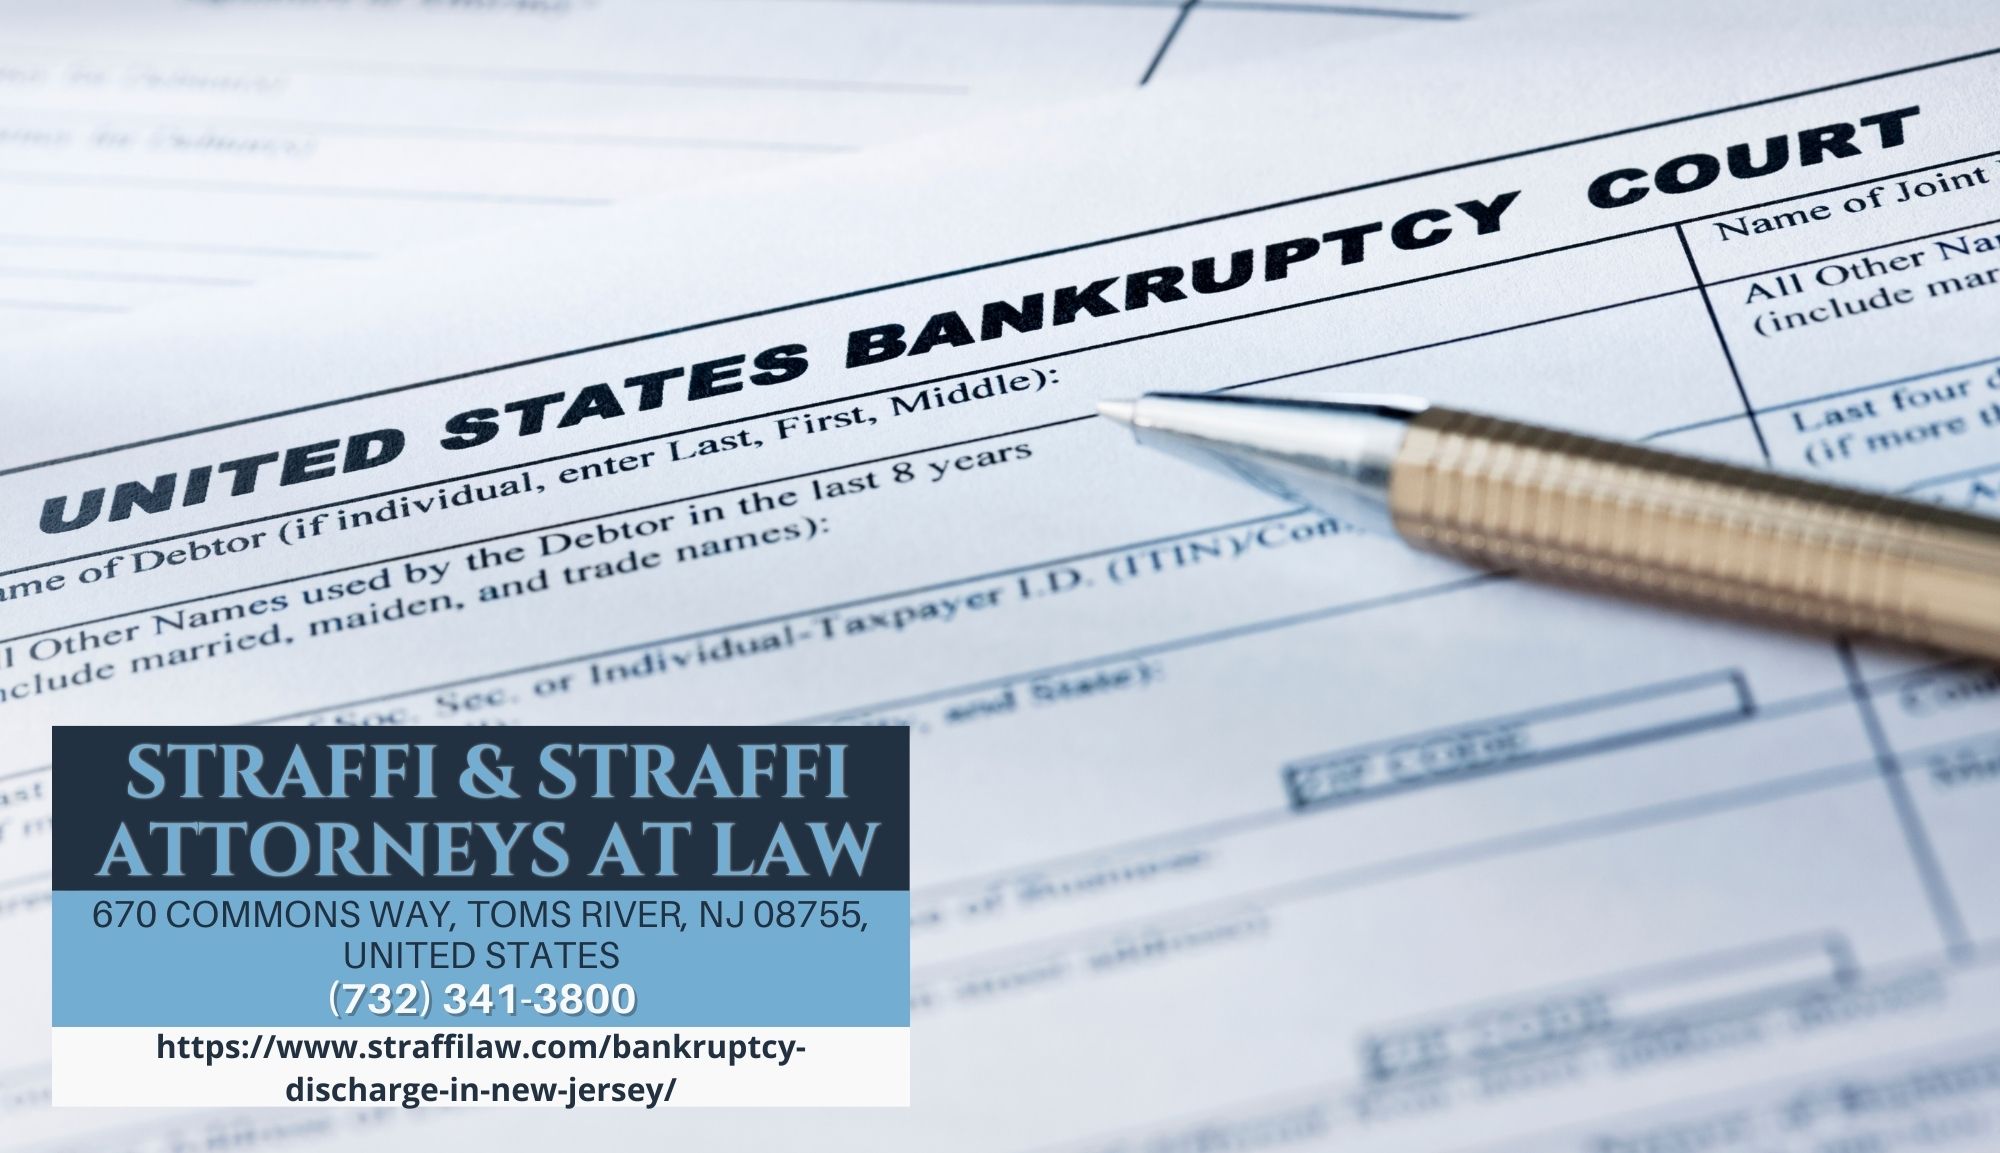 New Jersey Bankruptcy Attorney Daniel Straffi Provides Insight on 'Bankruptcy Discharge'